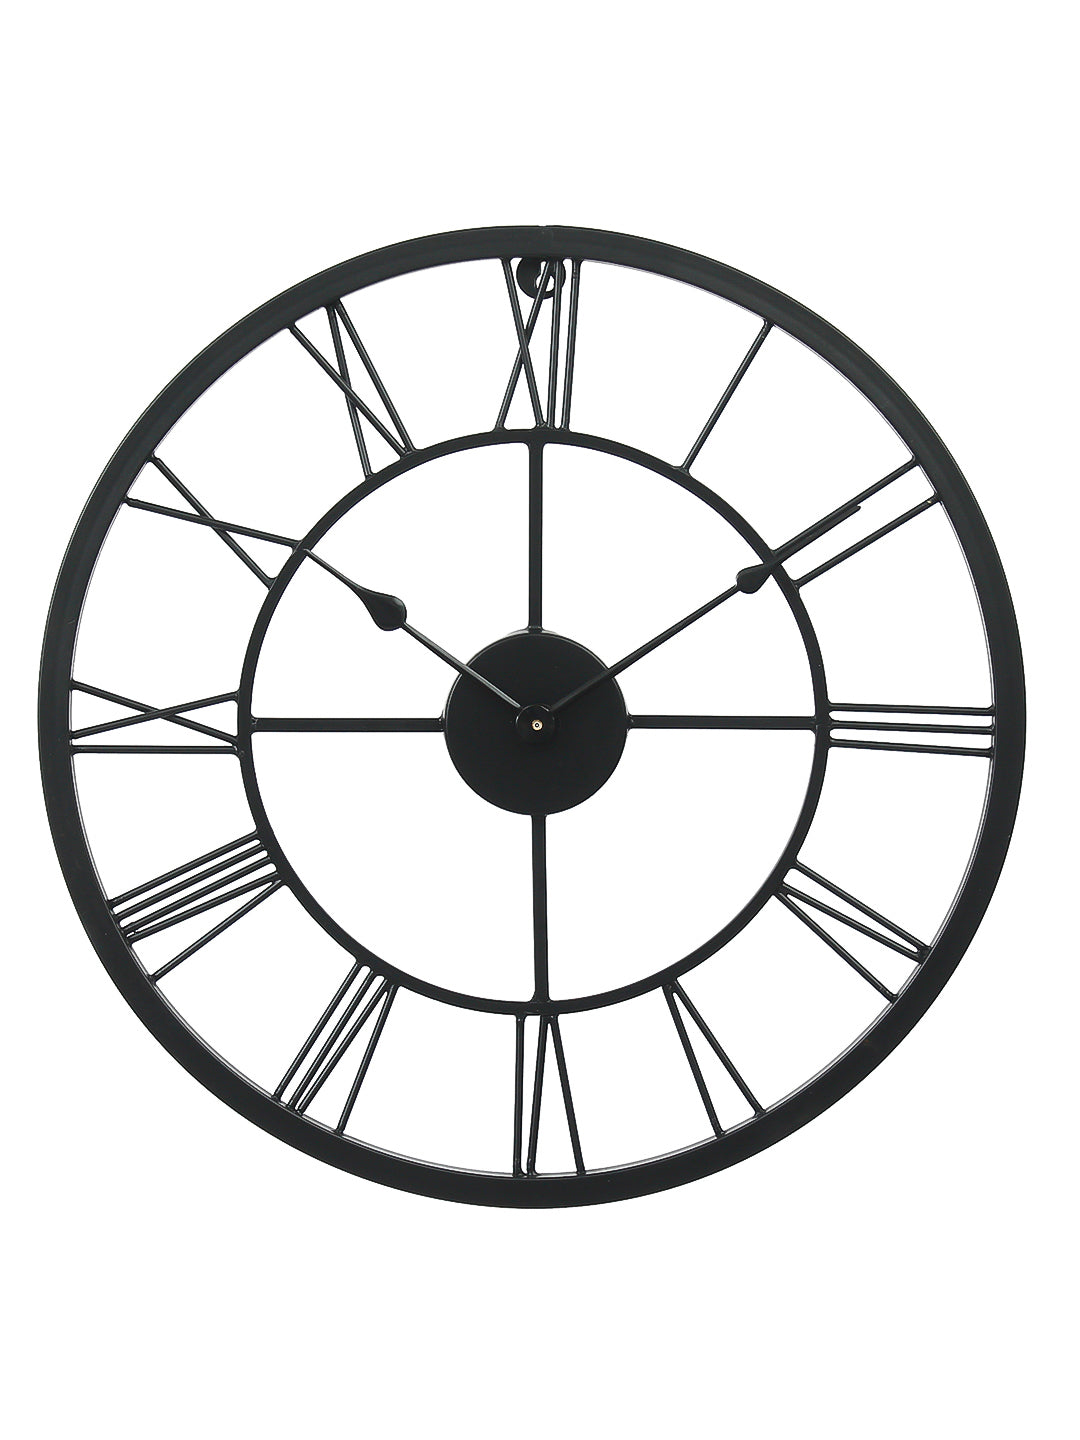 Black Iron Round Handcrafted Analog Roman Numeral Wall Clock Without Glass